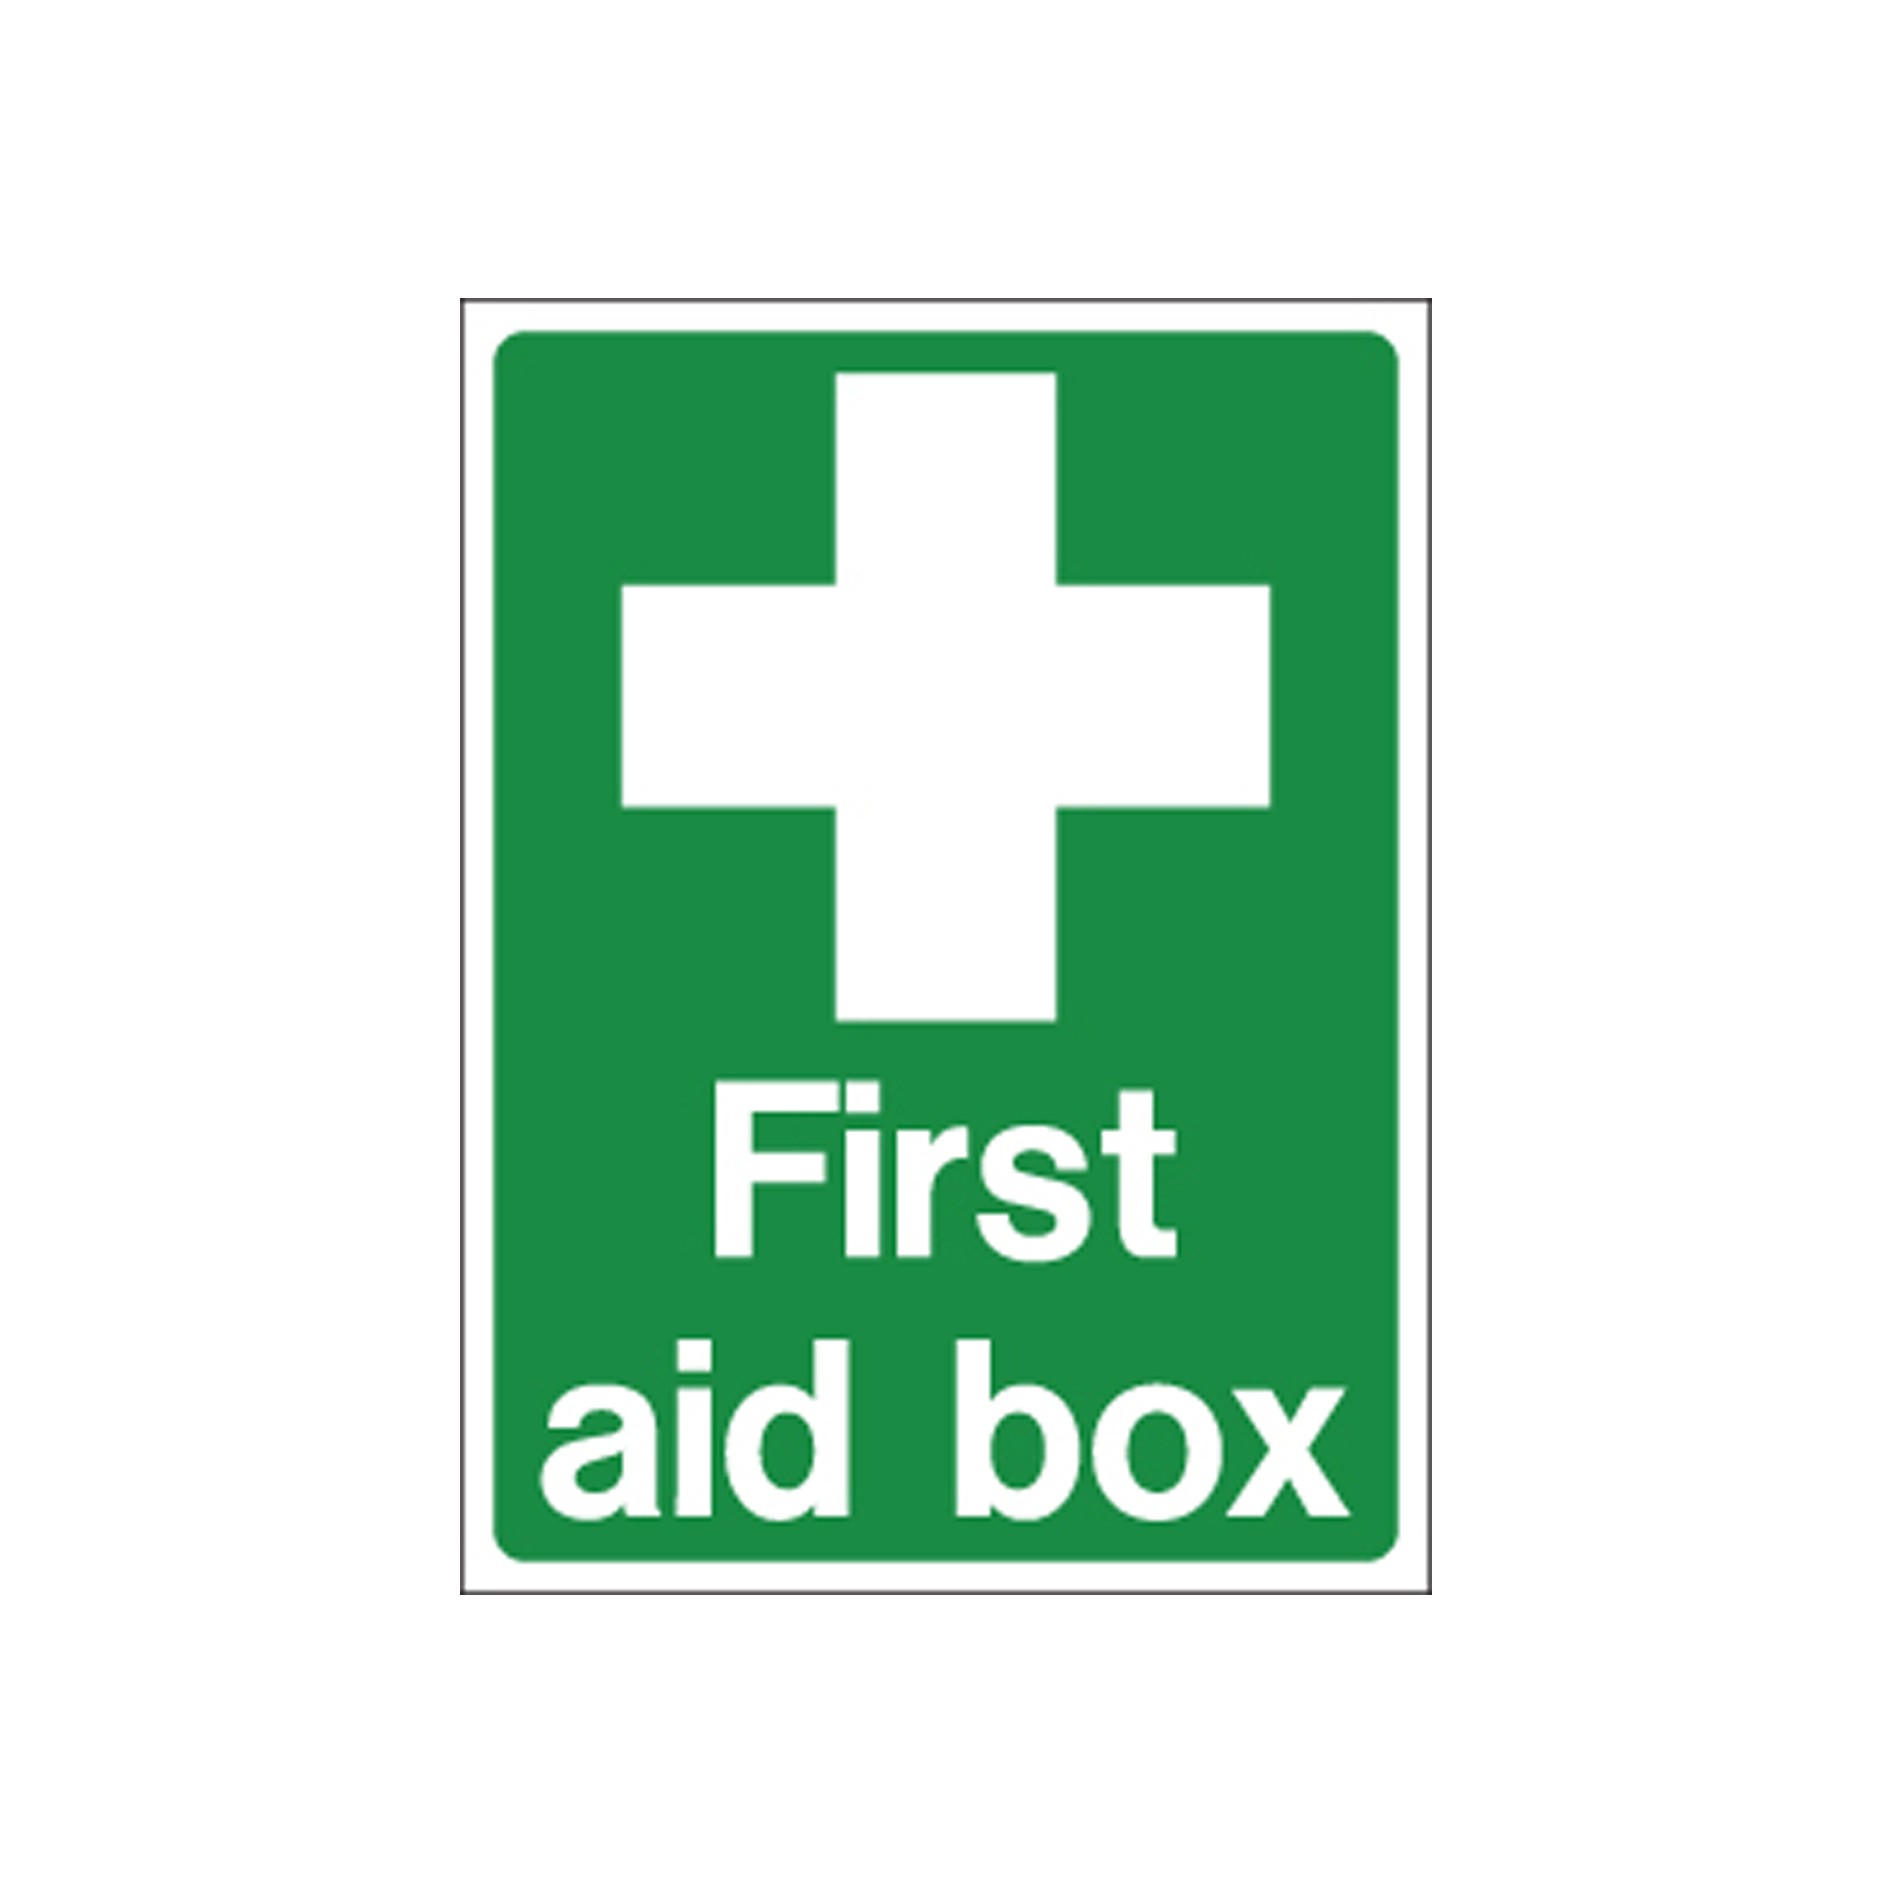 free-first-aid-sign-download-free-first-aid-sign-png-images-free